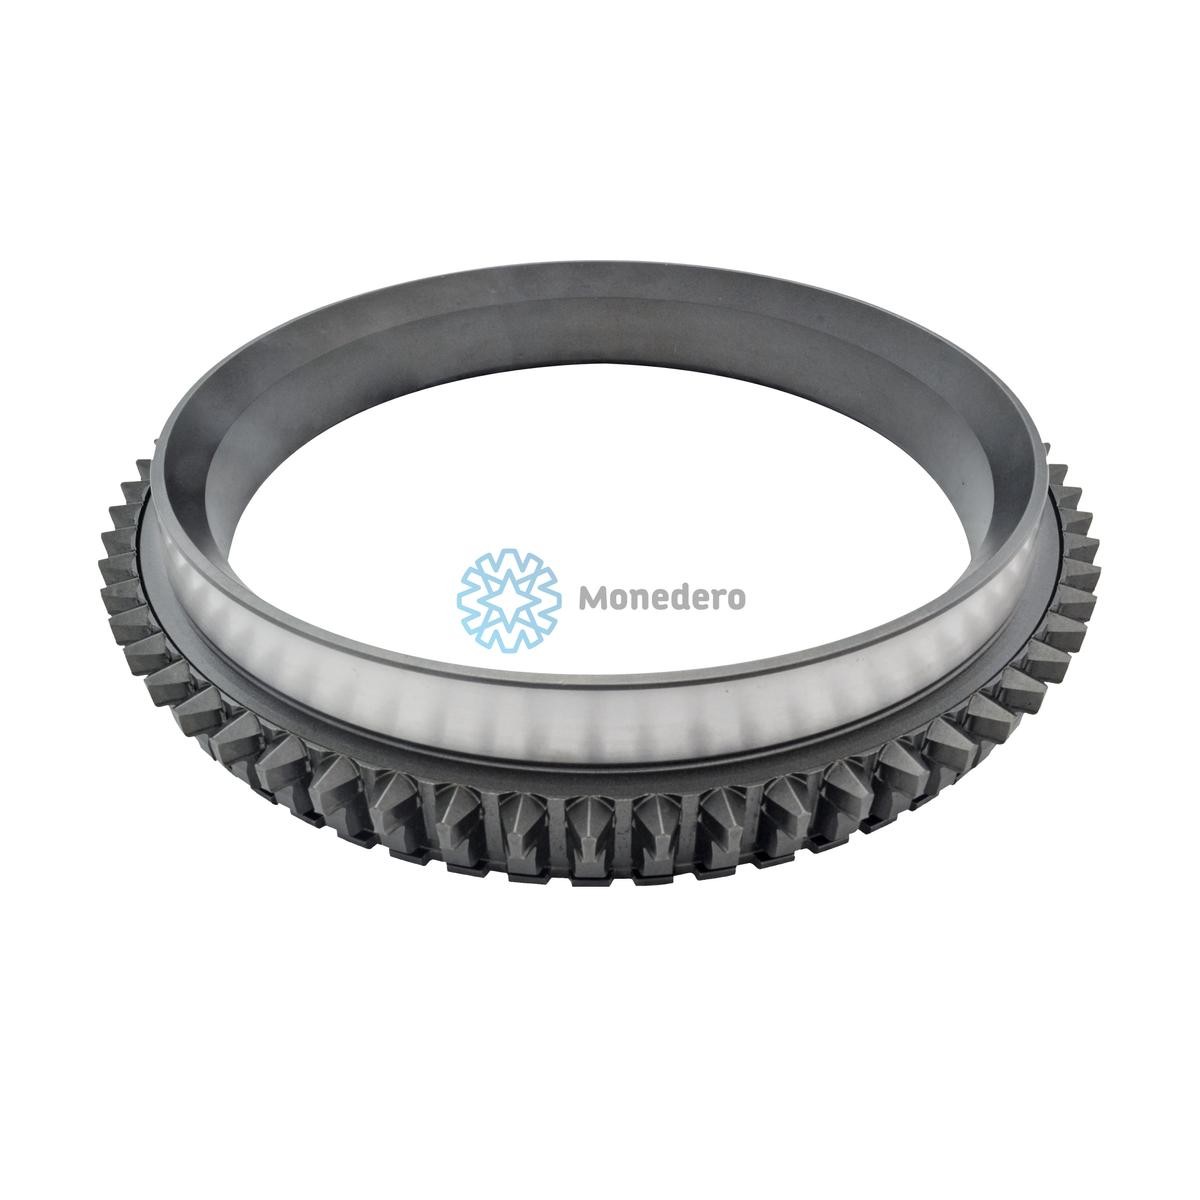 MONEDERO 40021100034 Synchronizer Ring, outer planetary gear output shaft 1883 350